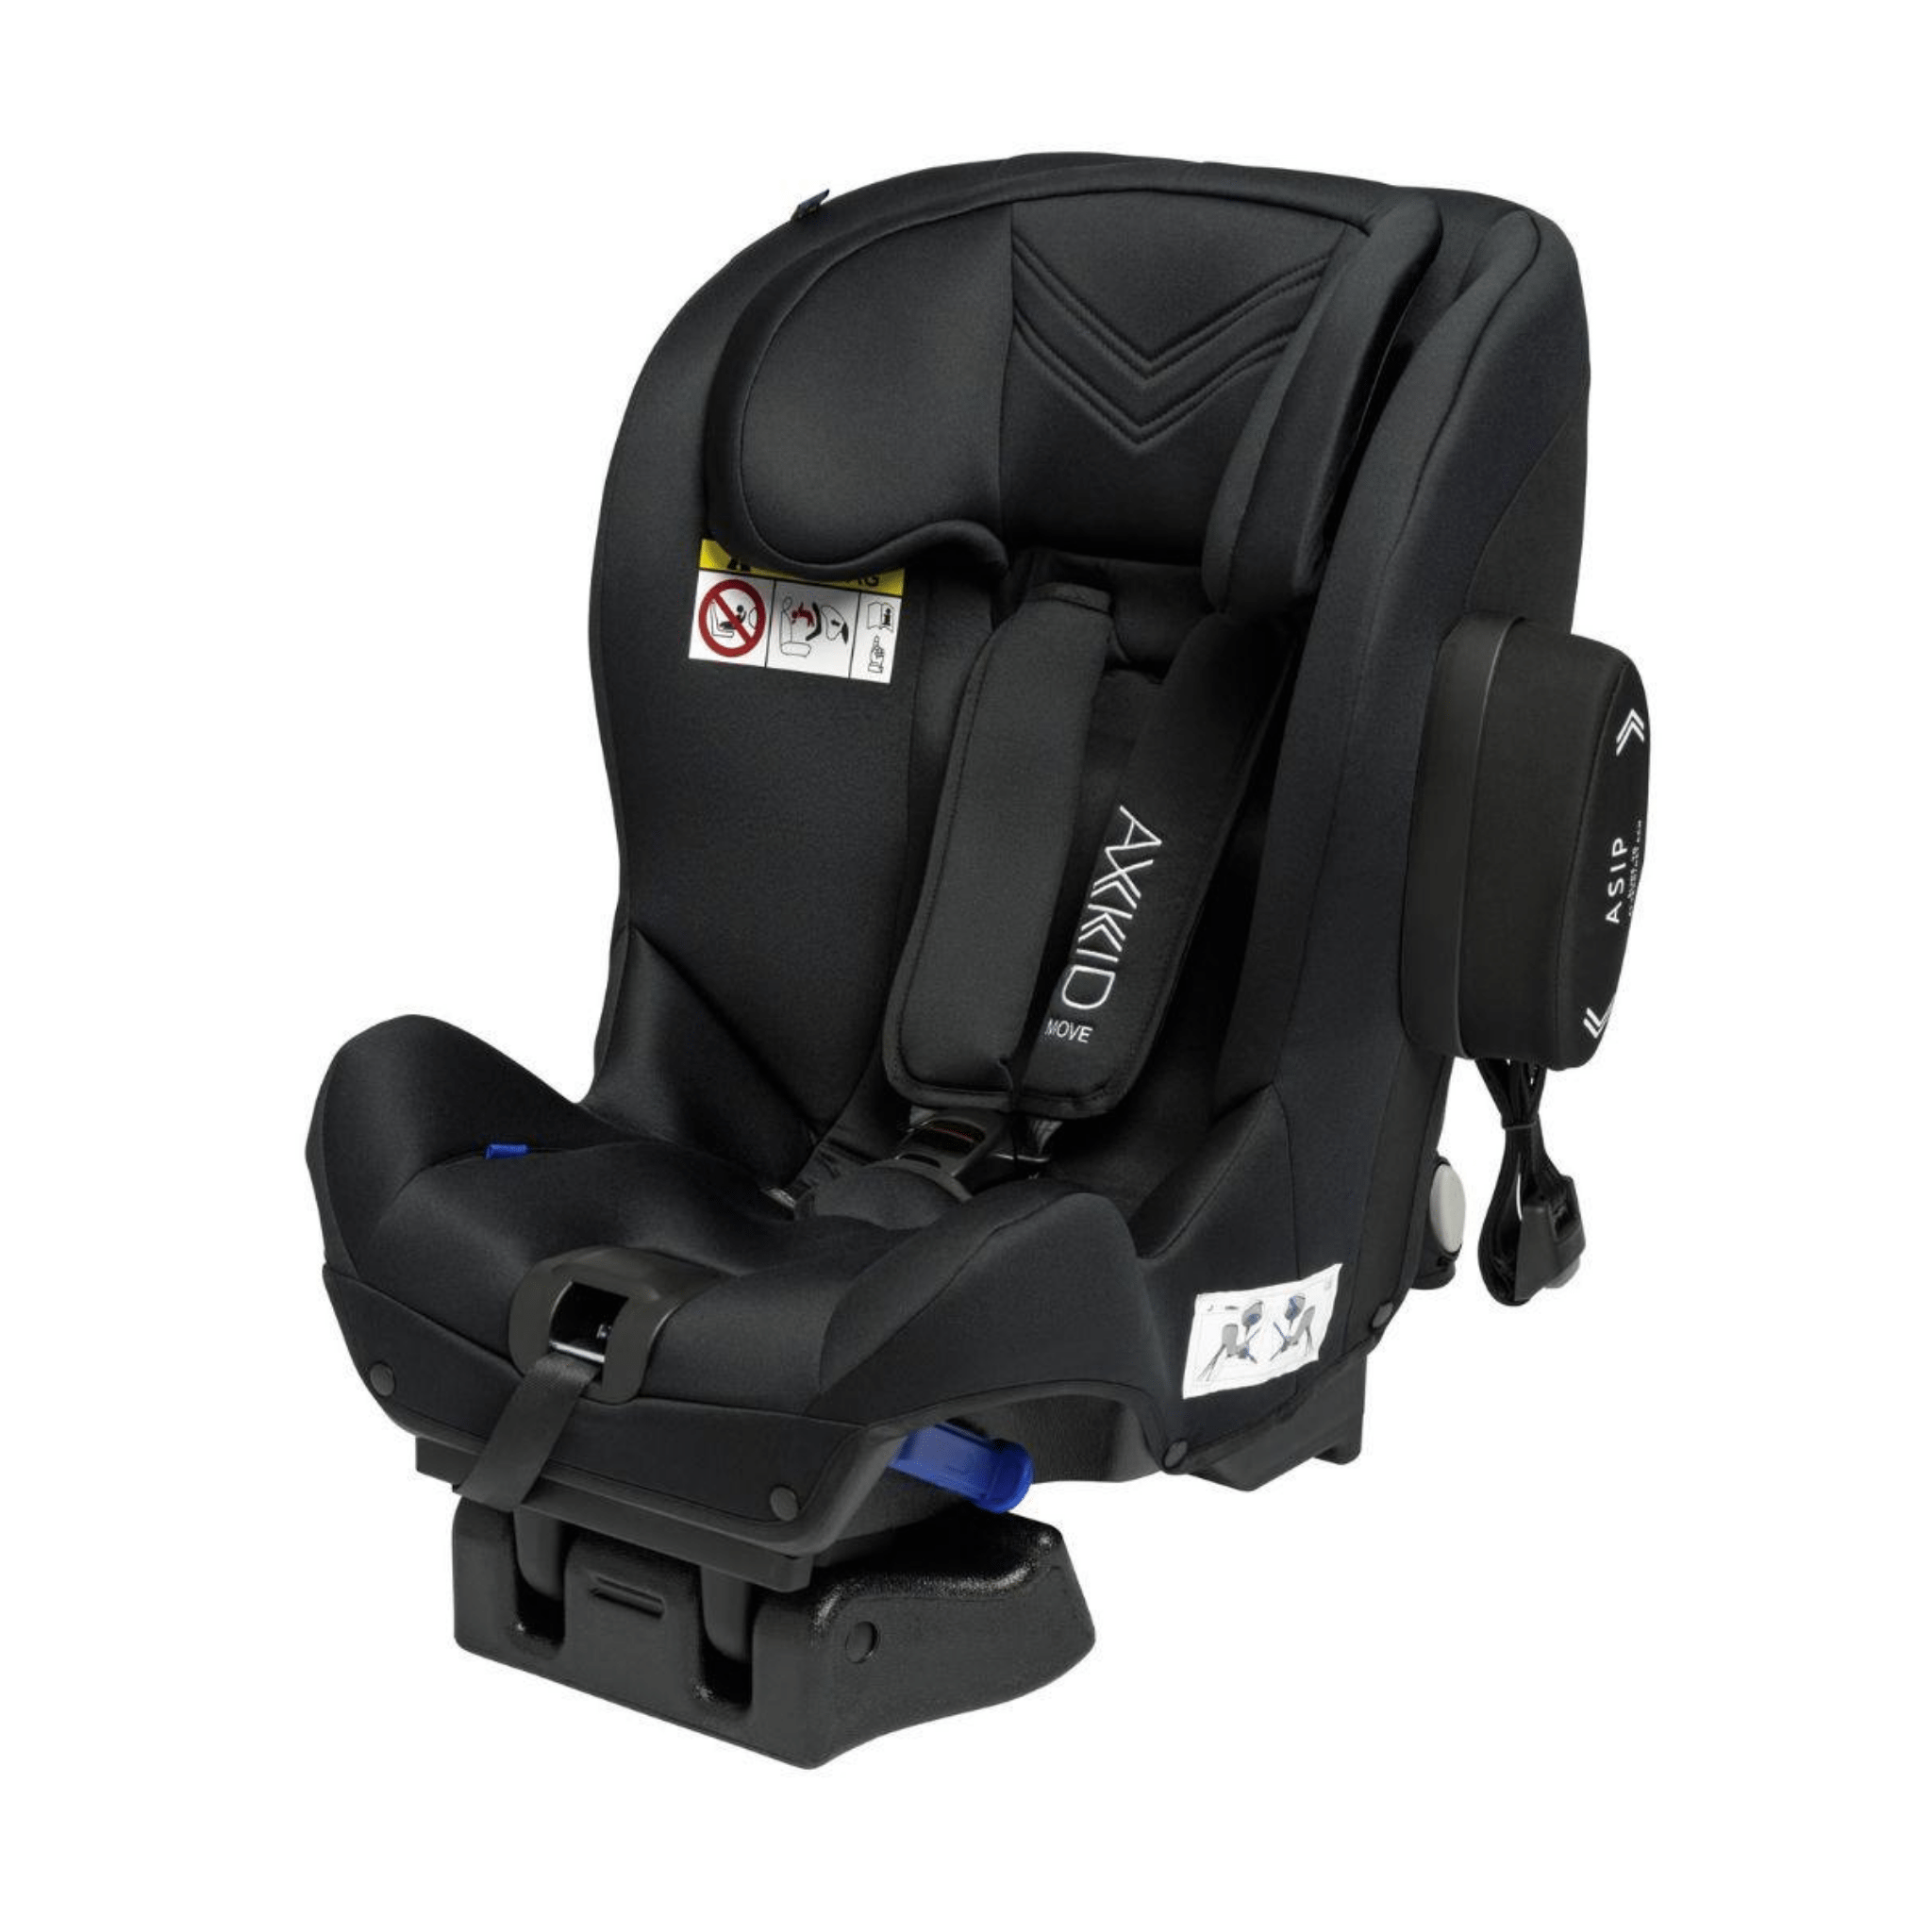 Axkid rear facing car seats Axkid Move Car Seat With Free Accessory - Tar